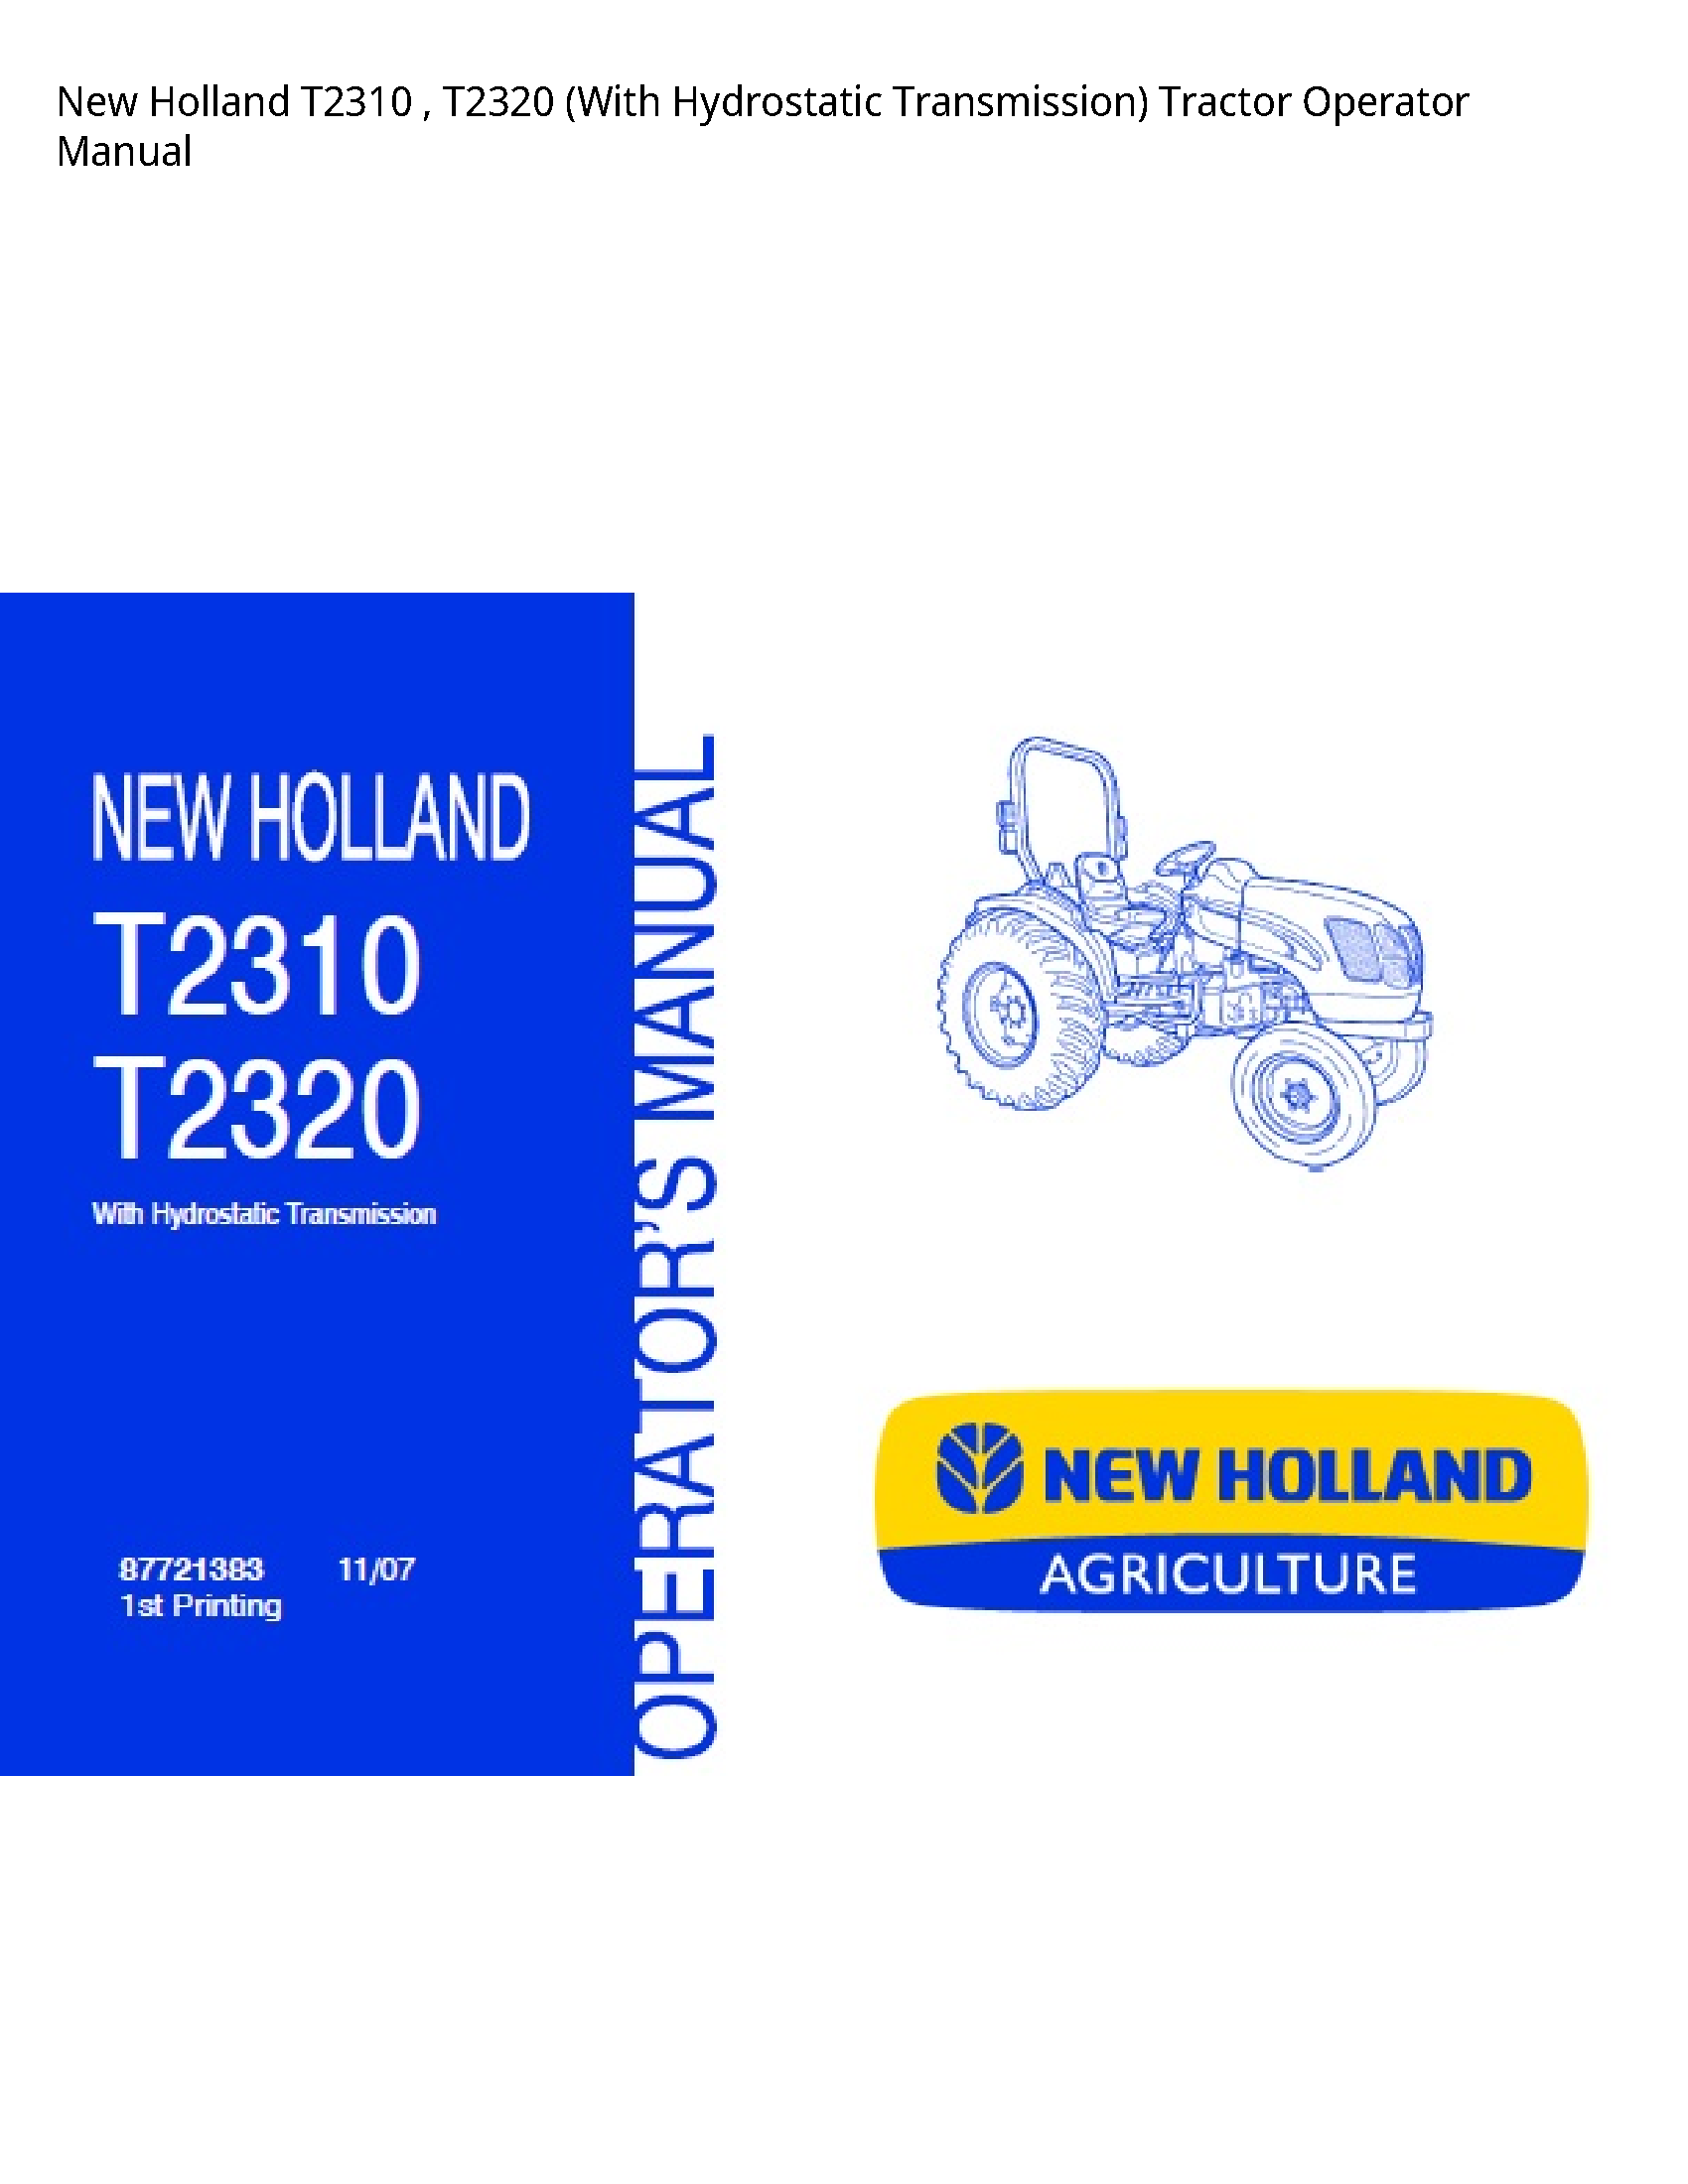 New Holland T2310 (With Hydrostatic Transmission) Tractor Operator manual